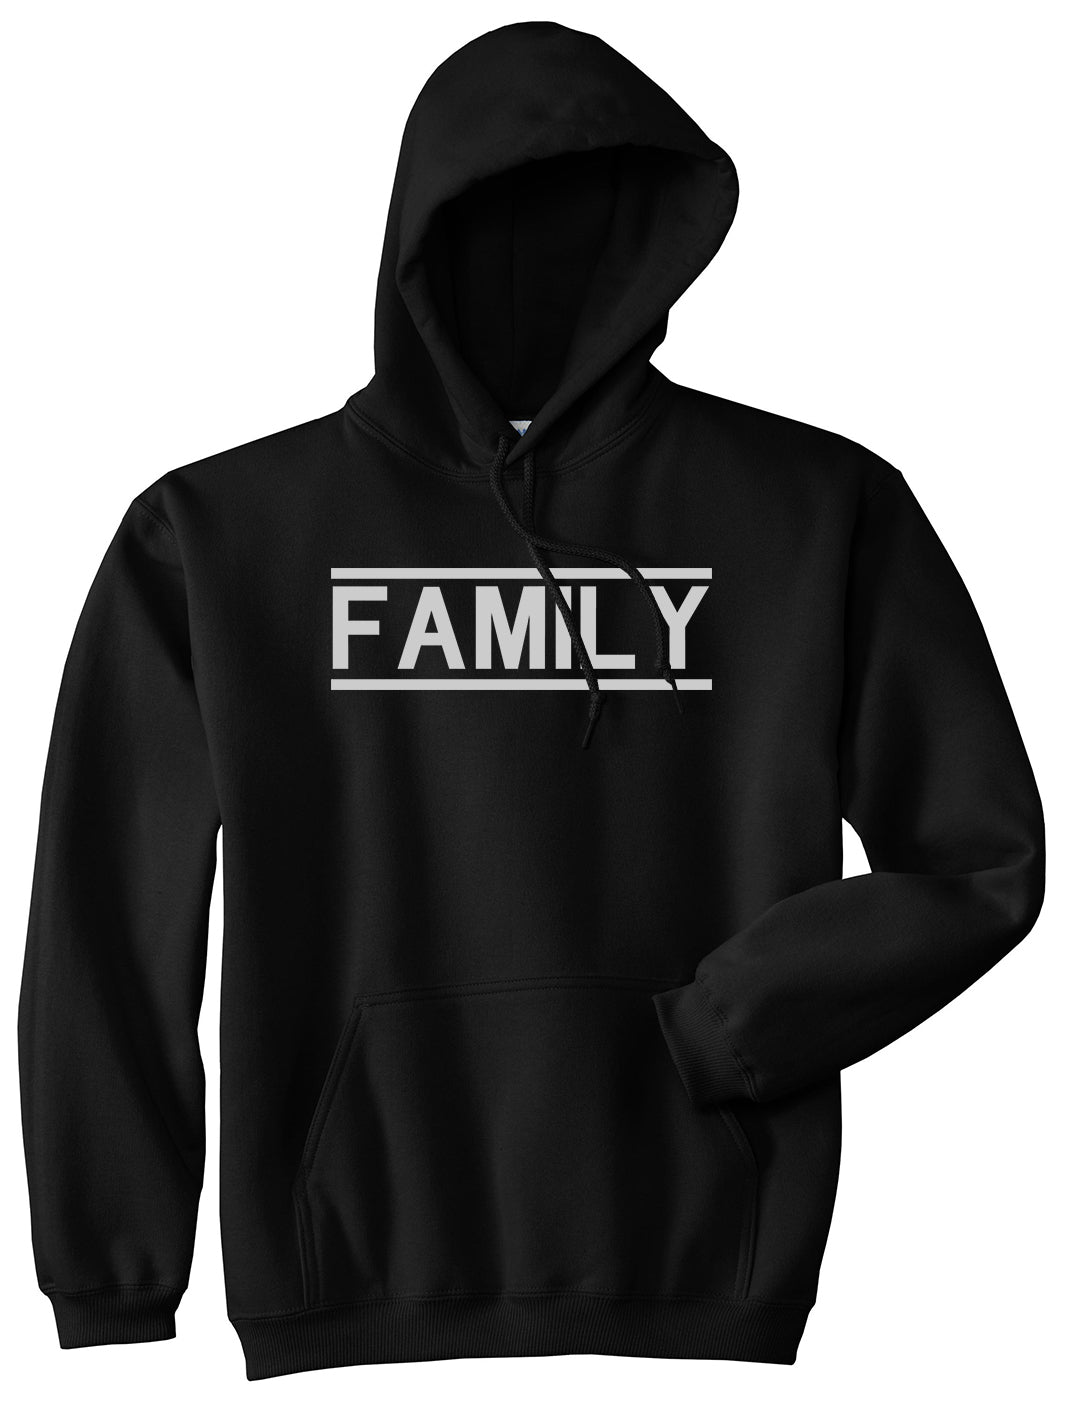 Family Fam Squad Mens Black Pullover Hoodie by KINGS OF NY